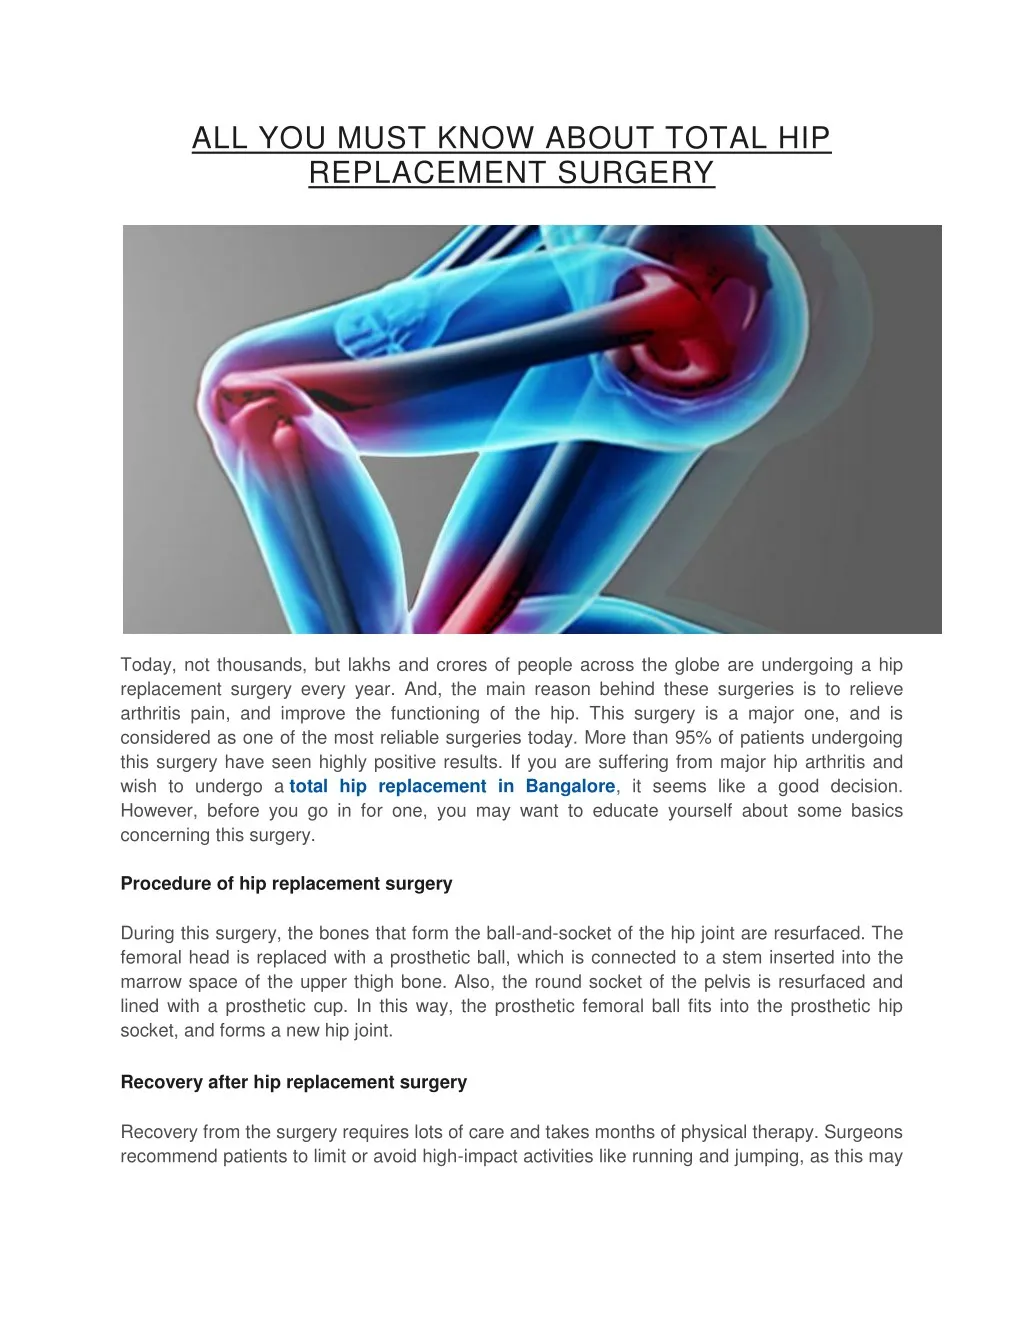 all you must know about total hip replacement